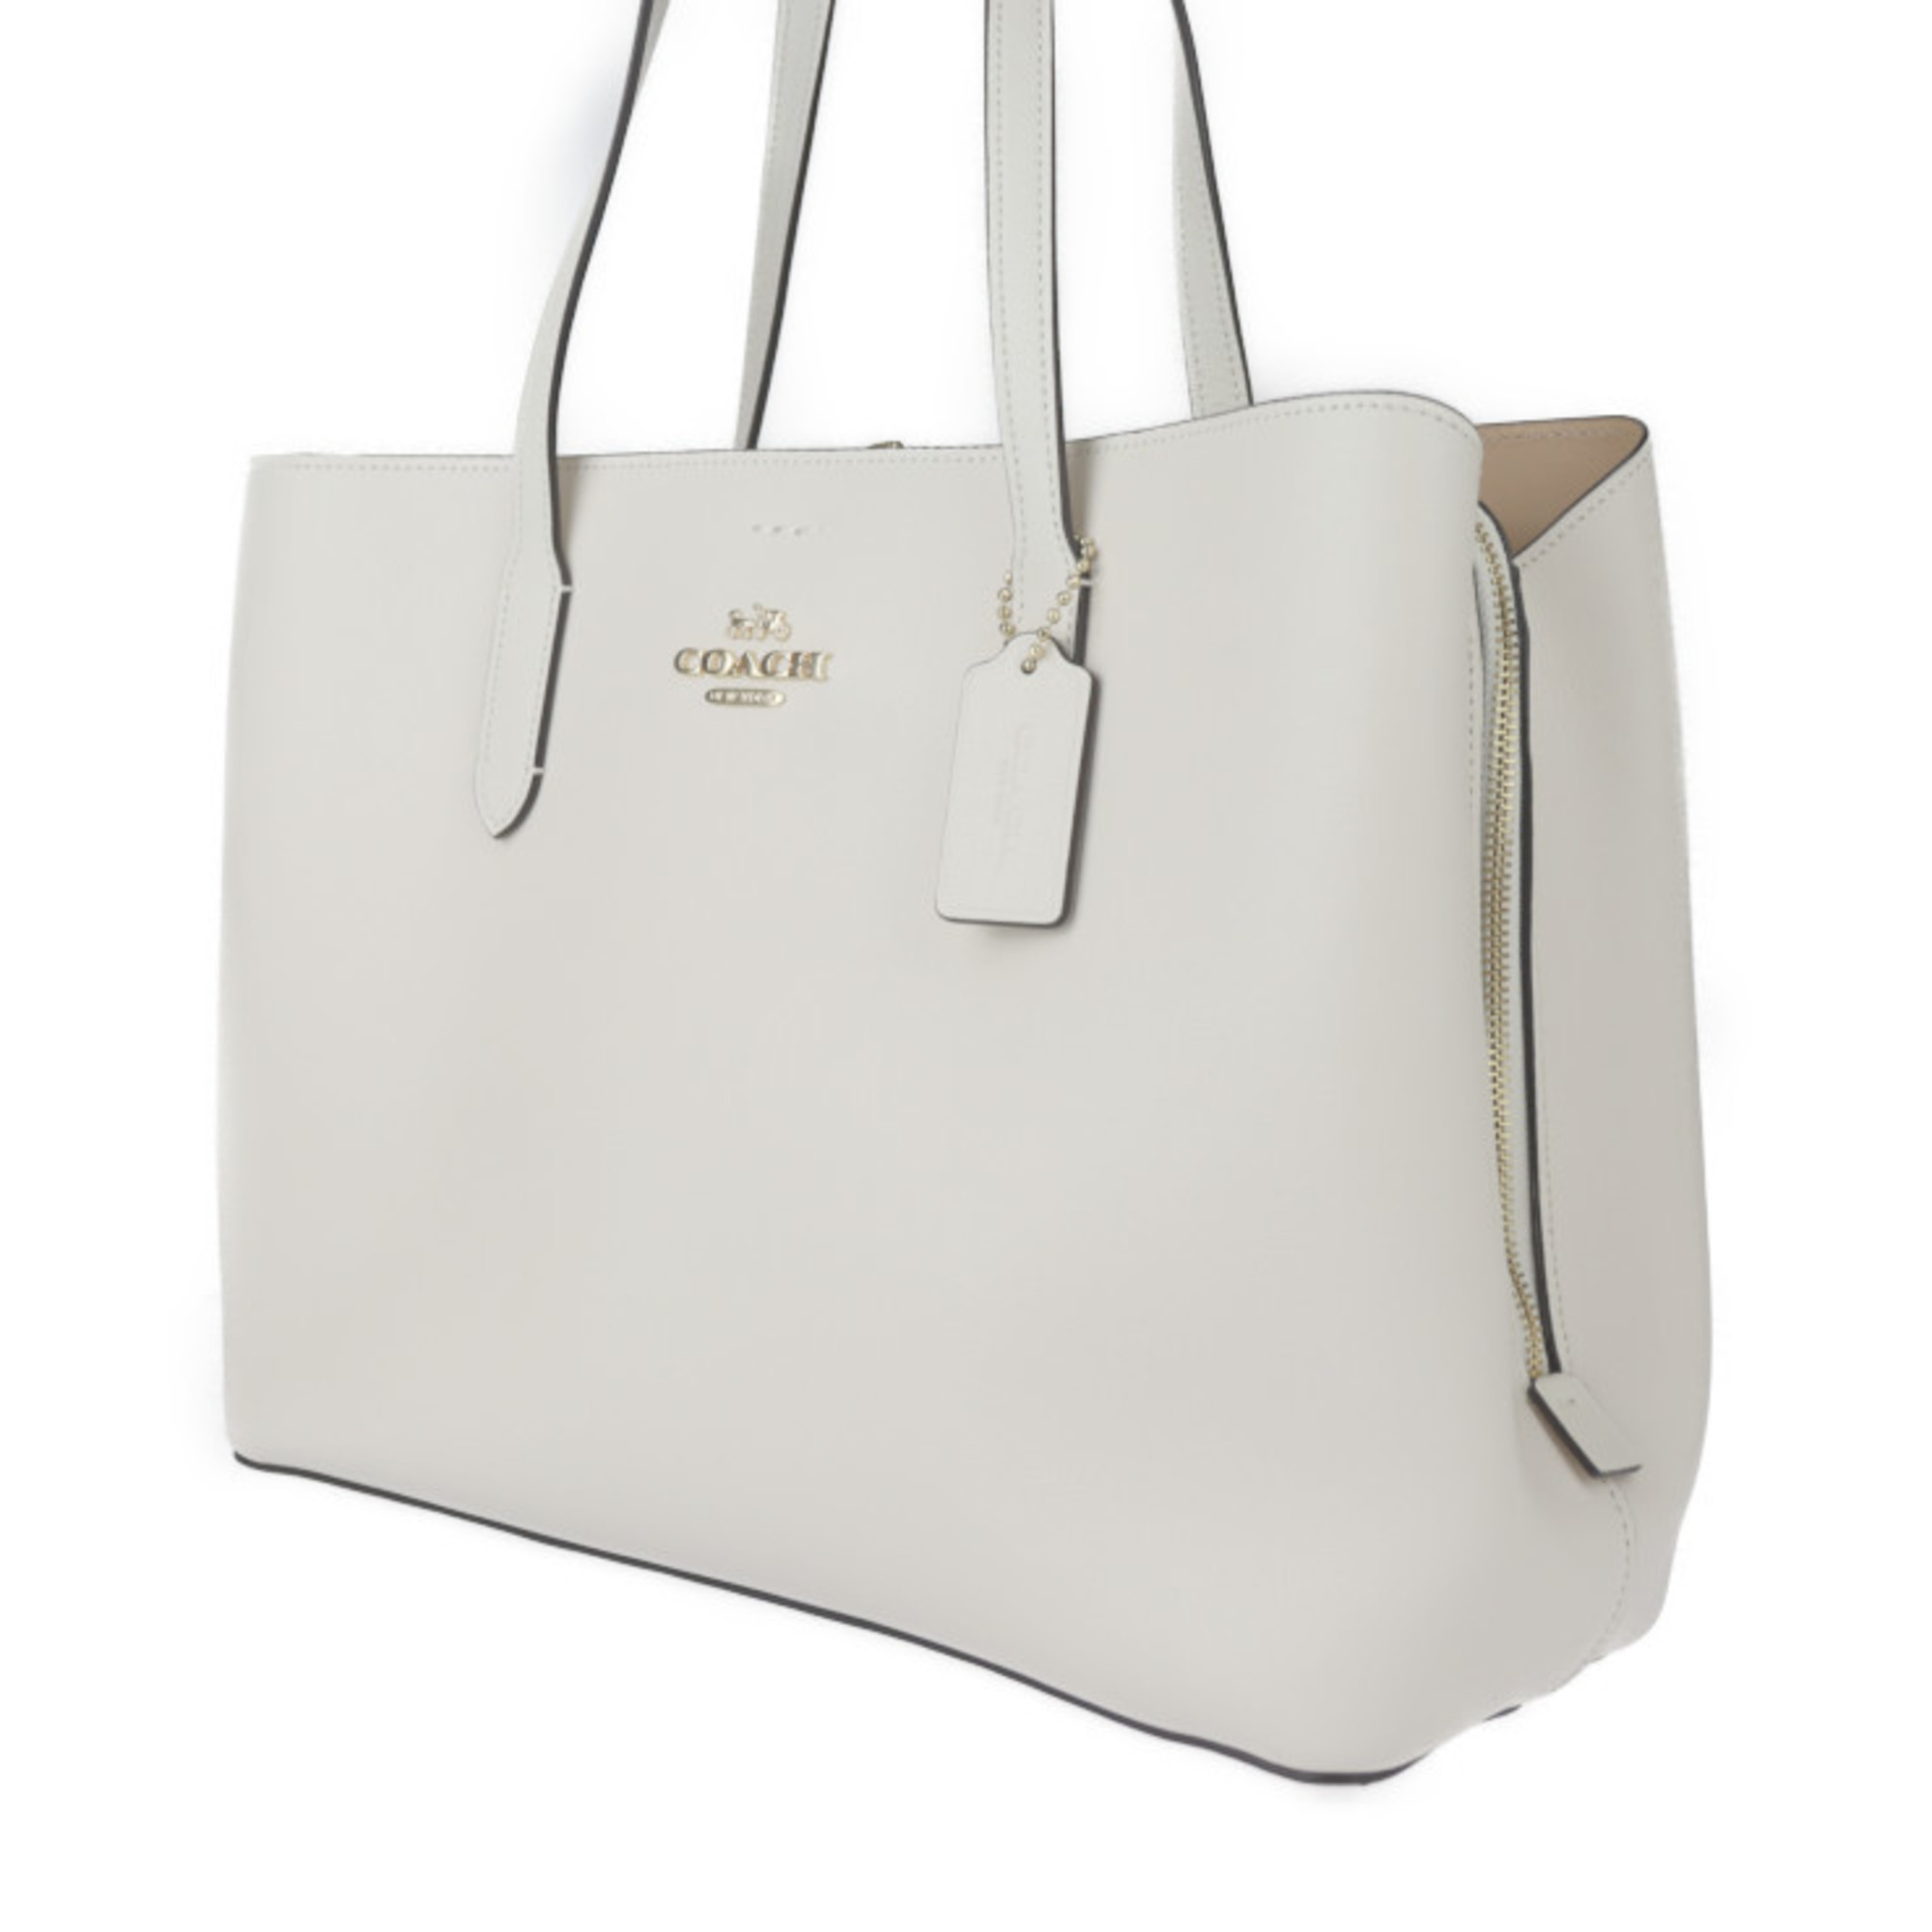 COACH Large Avenue Carryall Tote Bag F79988 Leather White Shoulder